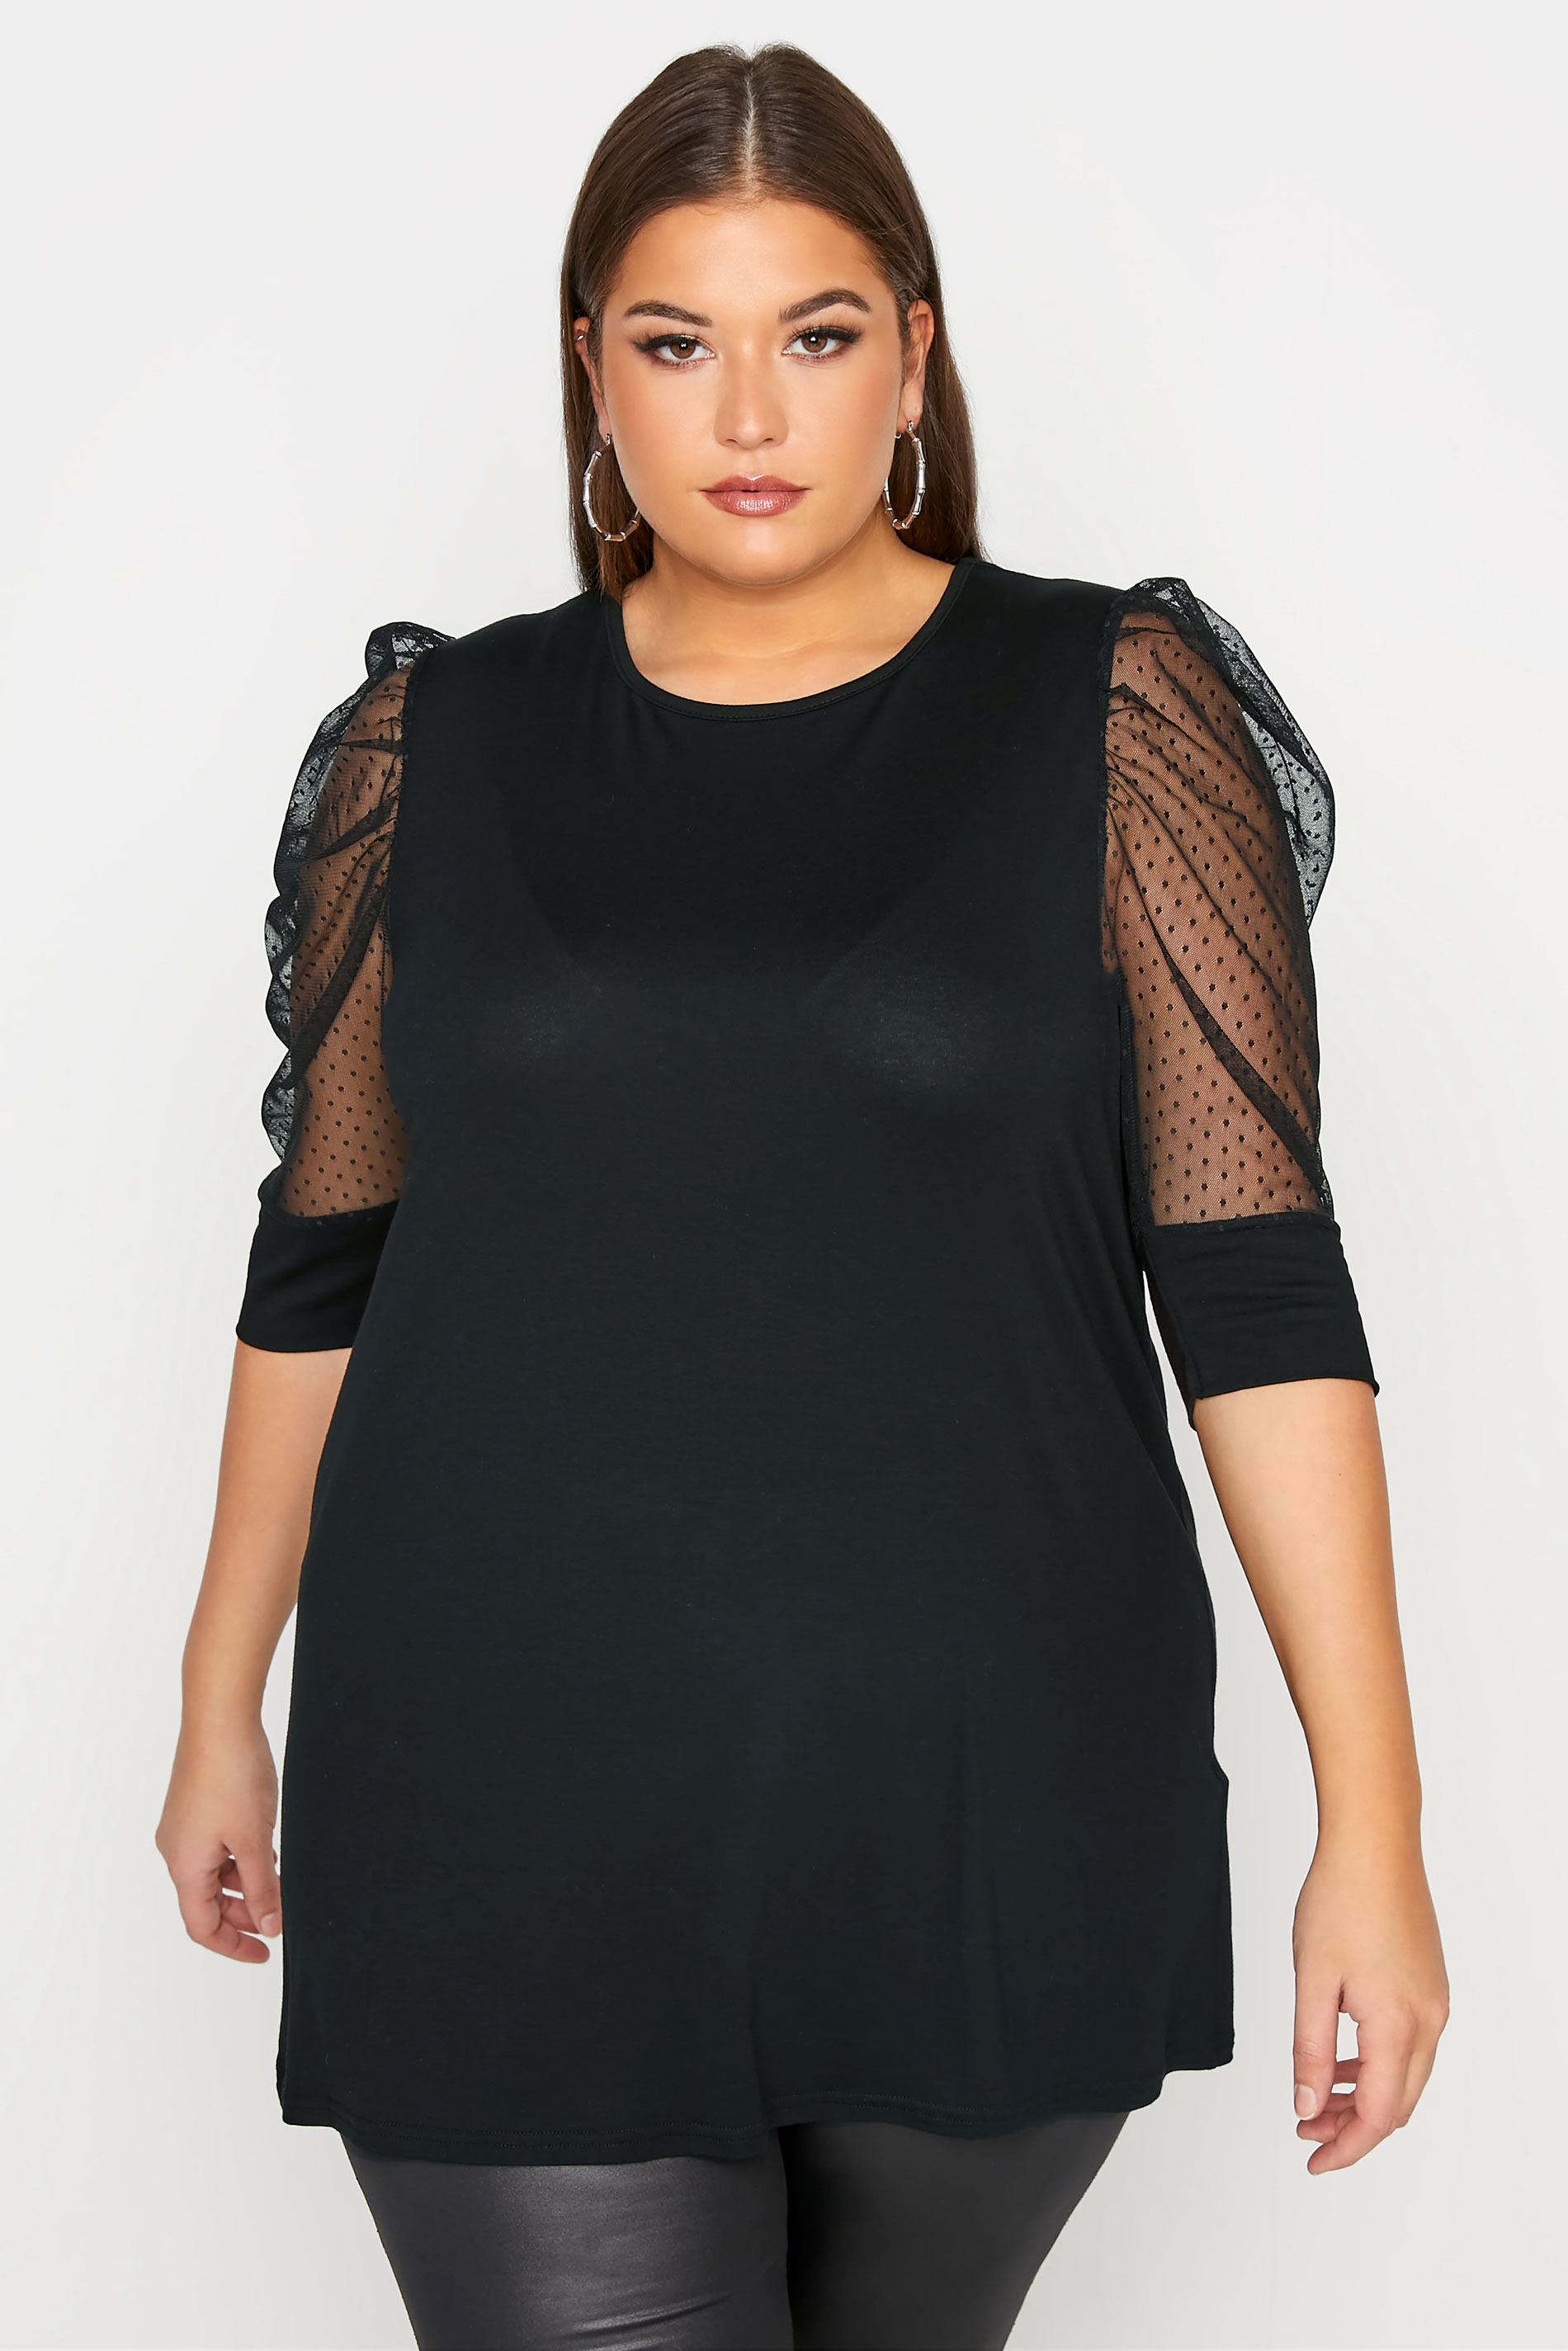 LIMITED COLLECTION Black Spot Ruched Sleeve Top_A.jpg